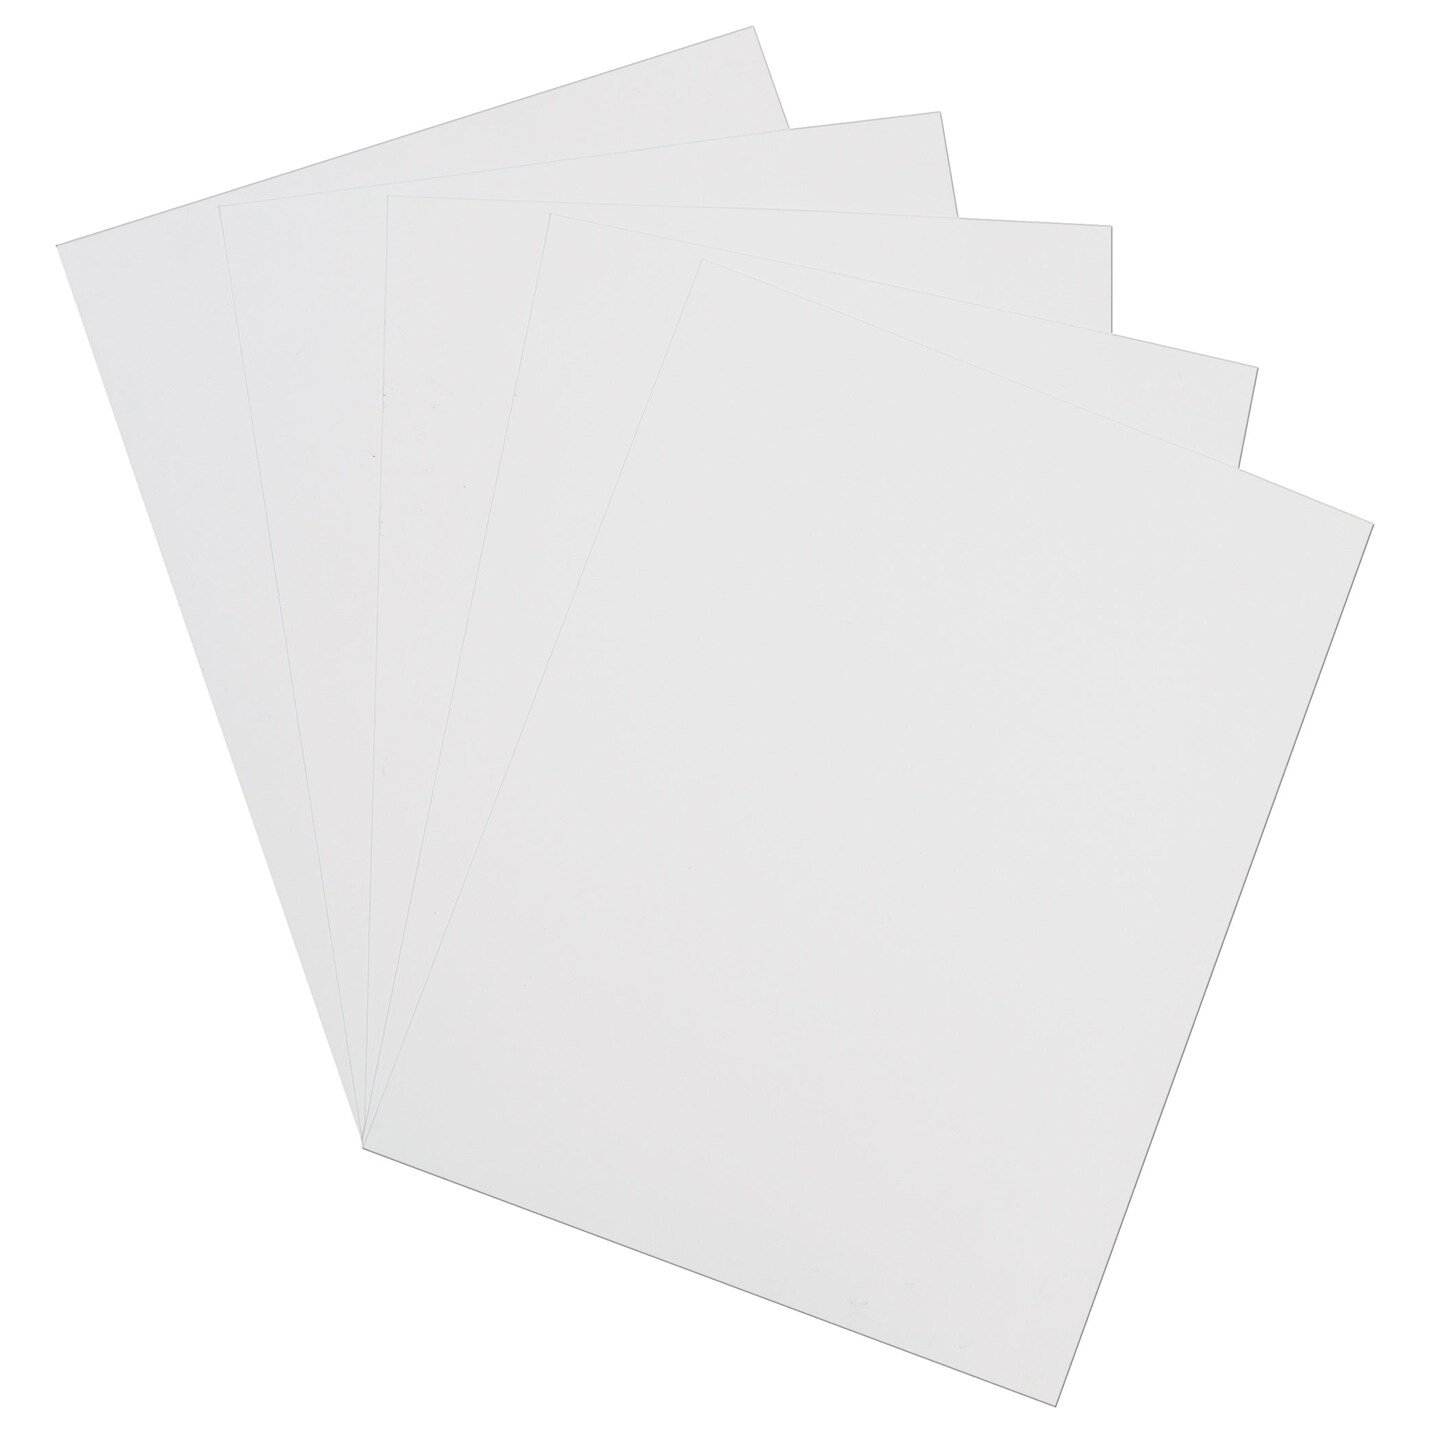 Card Stock, Classic White, 8-1/2 x 11, 100 Sheets Per Pack, 2 Packs